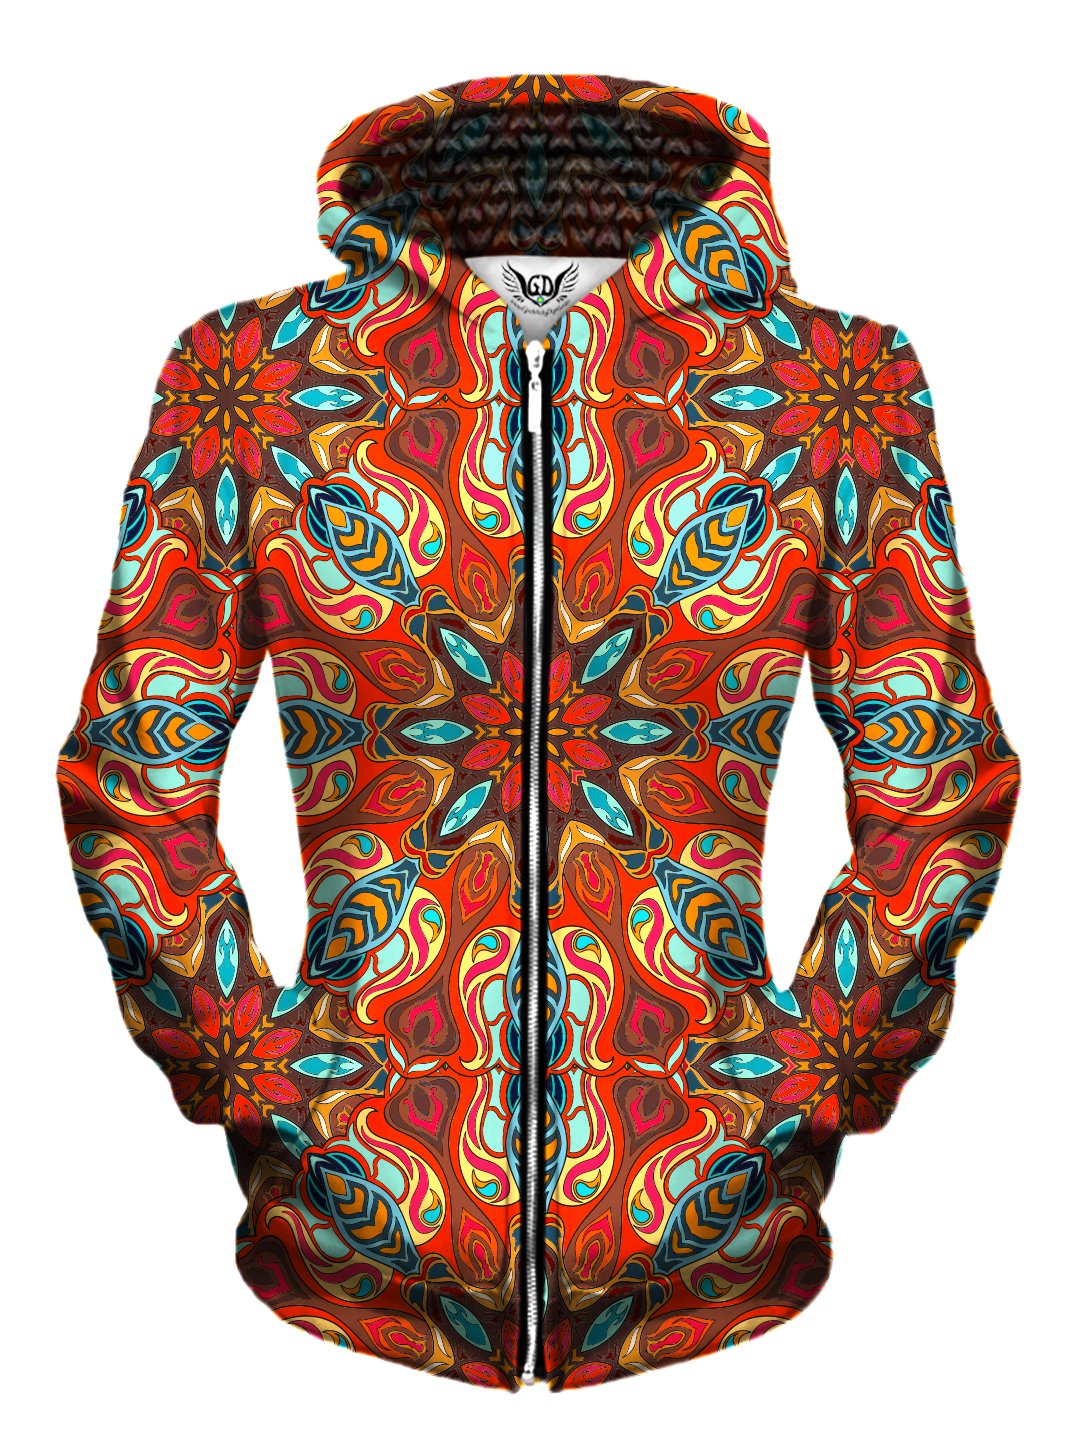 Front view of women's all over print sacred geometry zip up hoody by Gratefully Dyed Apparel.